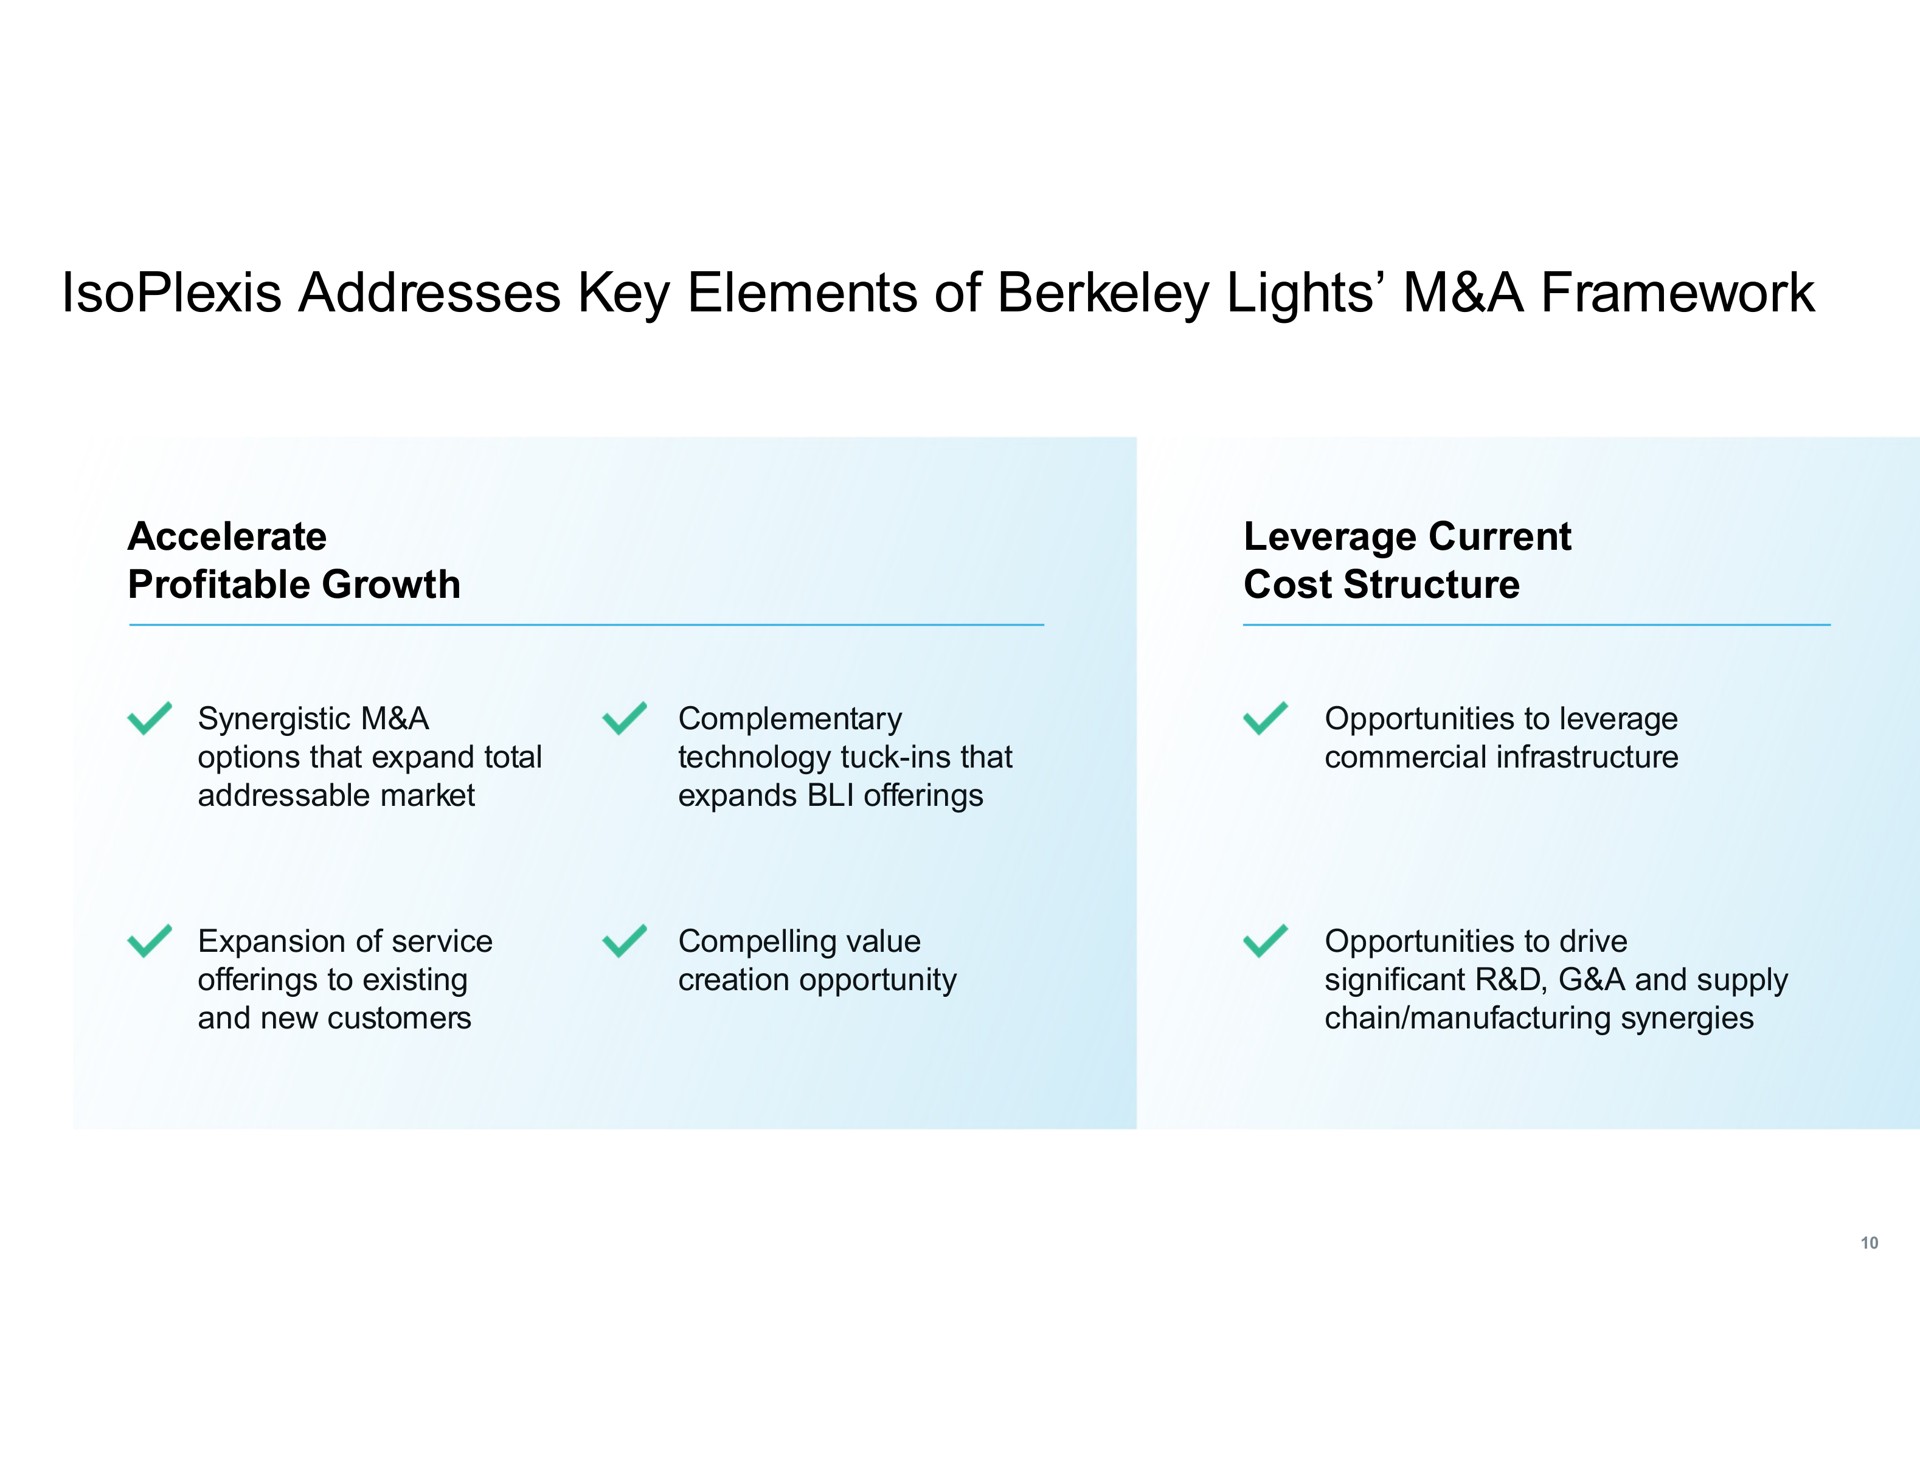 addresses key elements of lights a framework accelerate profitable growth leverage current cost structure | Berkeley Lights